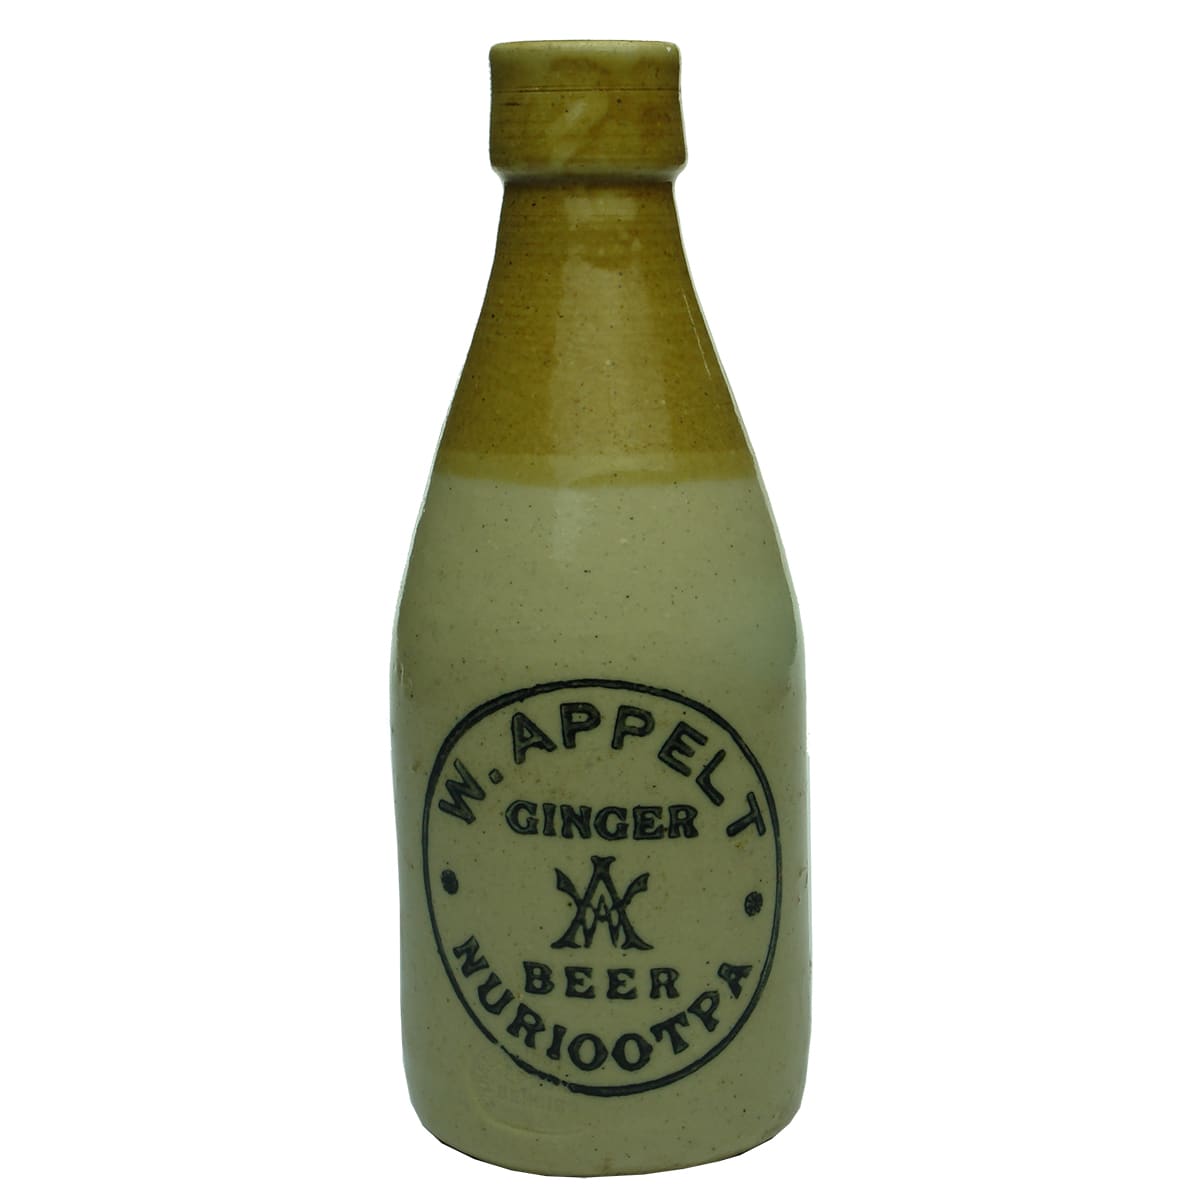 Ginger Beer. W. Appelt, Nuriootpa. Cork stopper. Champagne. Tan top. (South Australia)